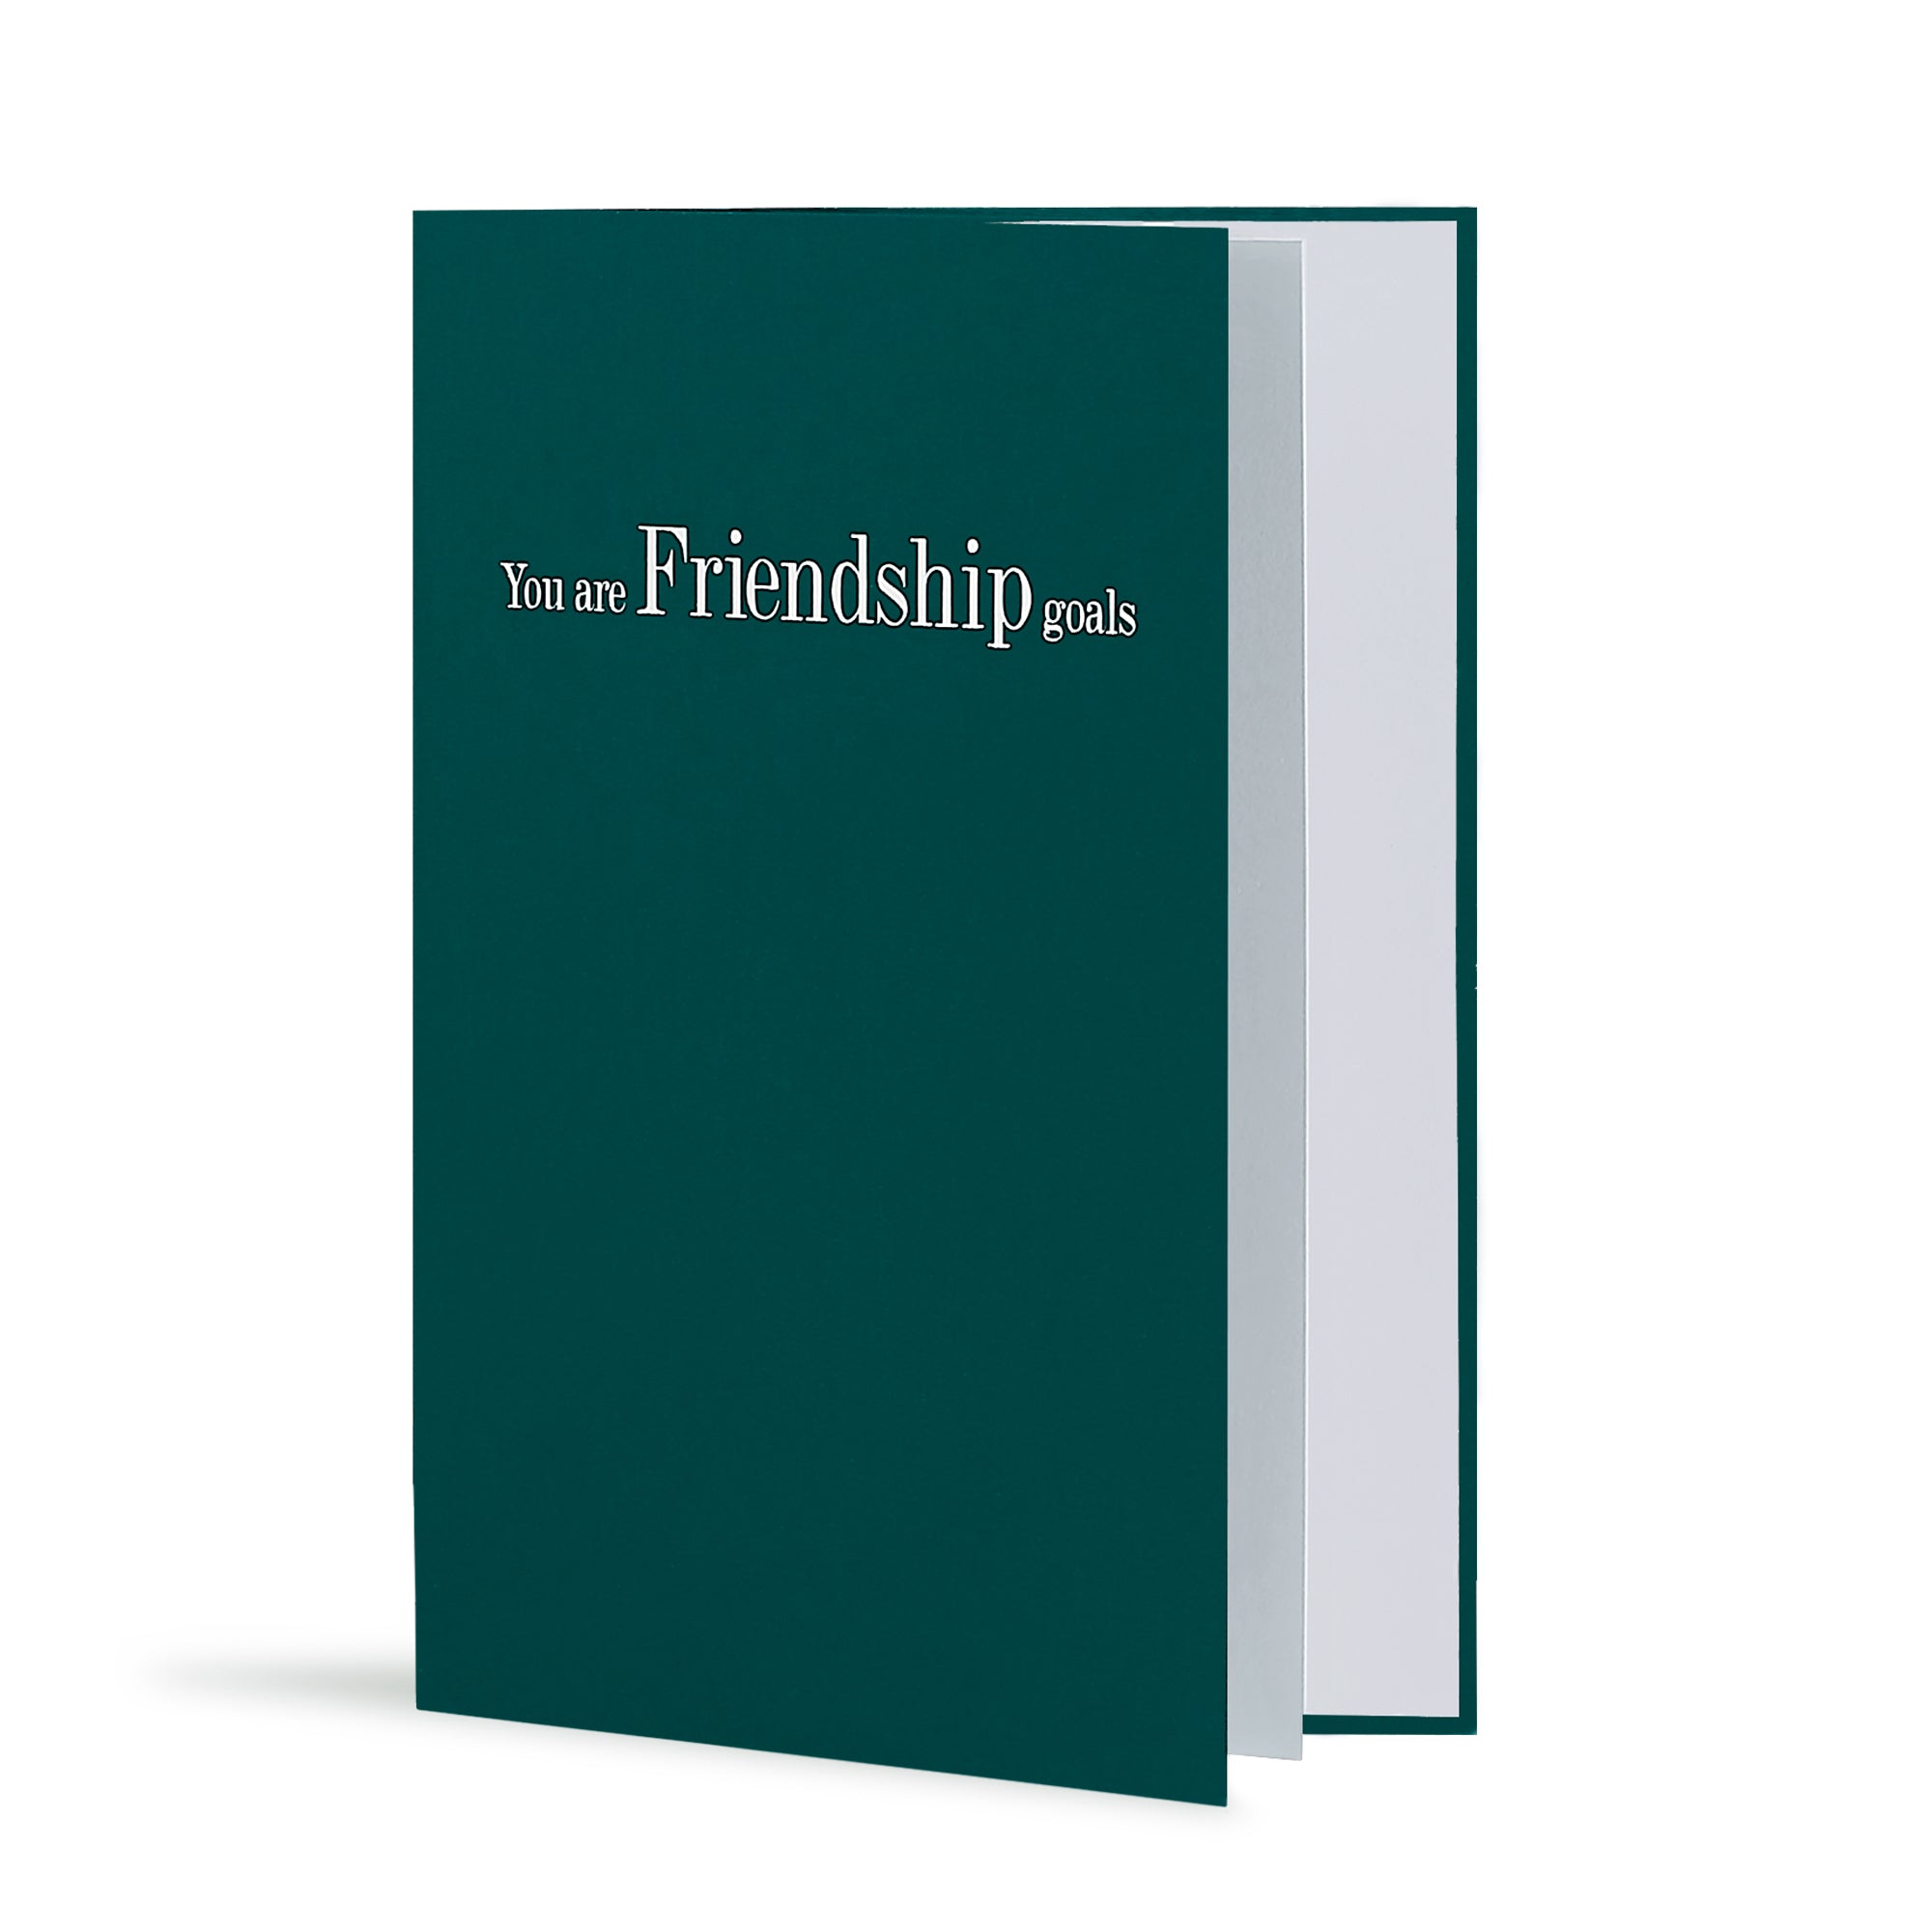 You Are Friendship Goals Greeting Card in Forest Green, Side